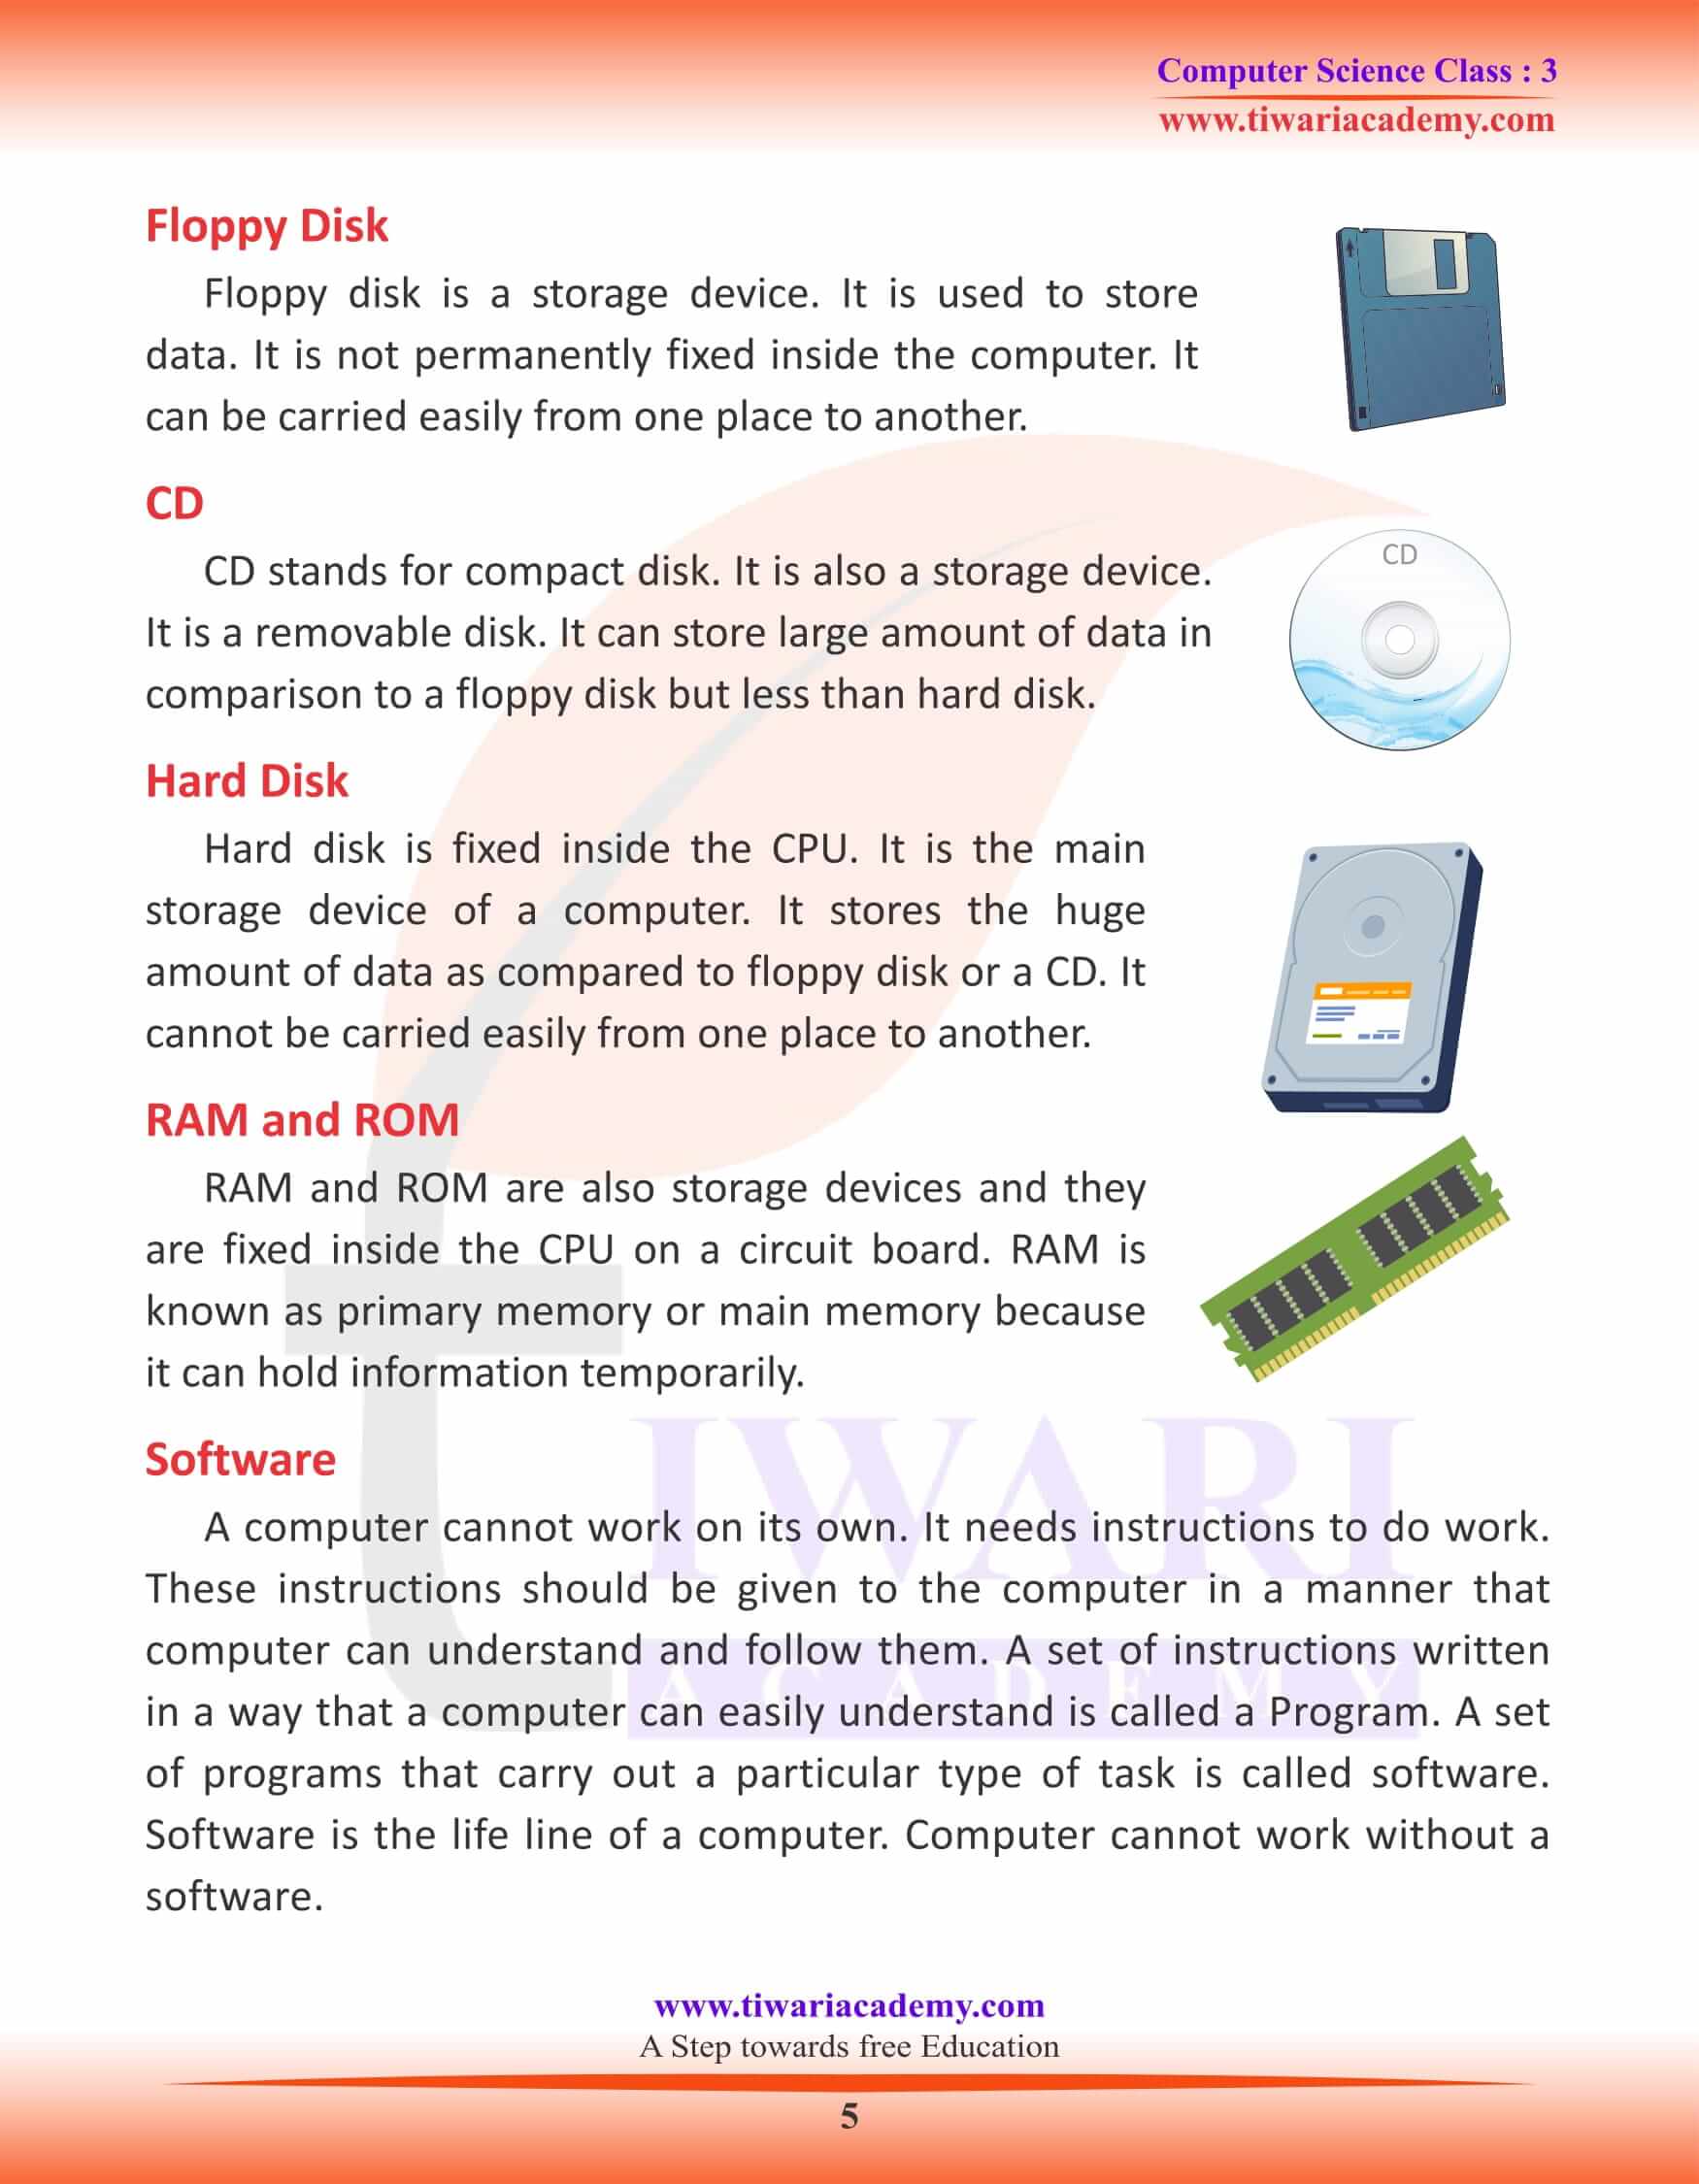 NCERT Solutions for Class 3 Computer Science Chapter 2 Study Material